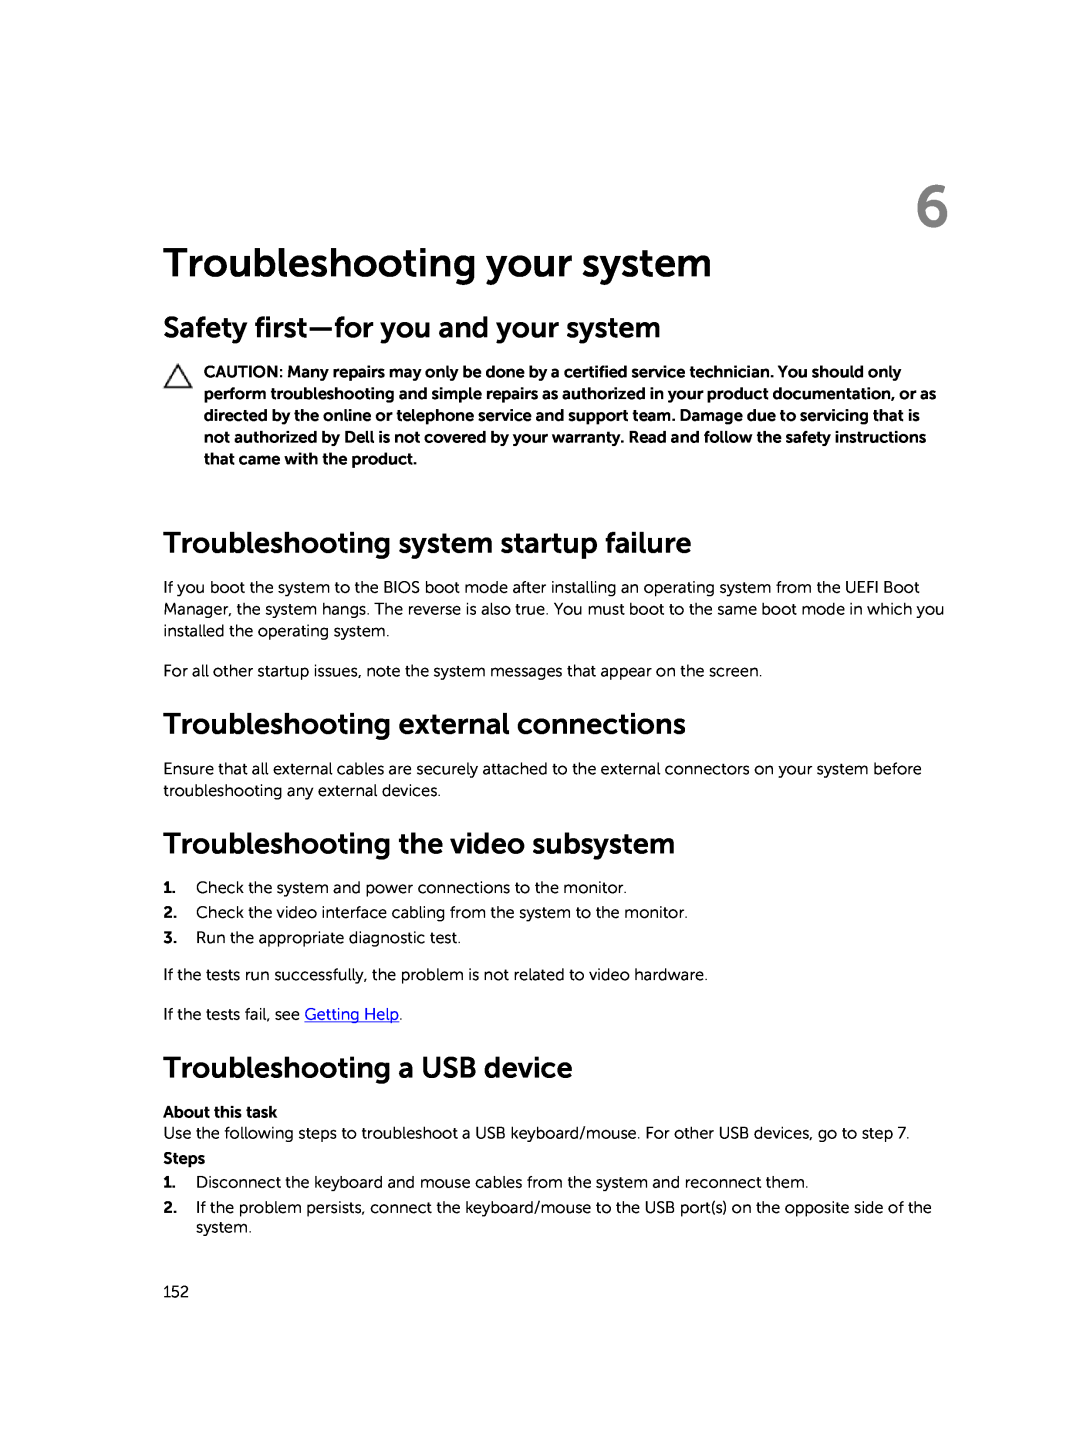 Dell E30S Troubleshooting your system, Safety first-for you and your system, Troubleshooting system startup failure 